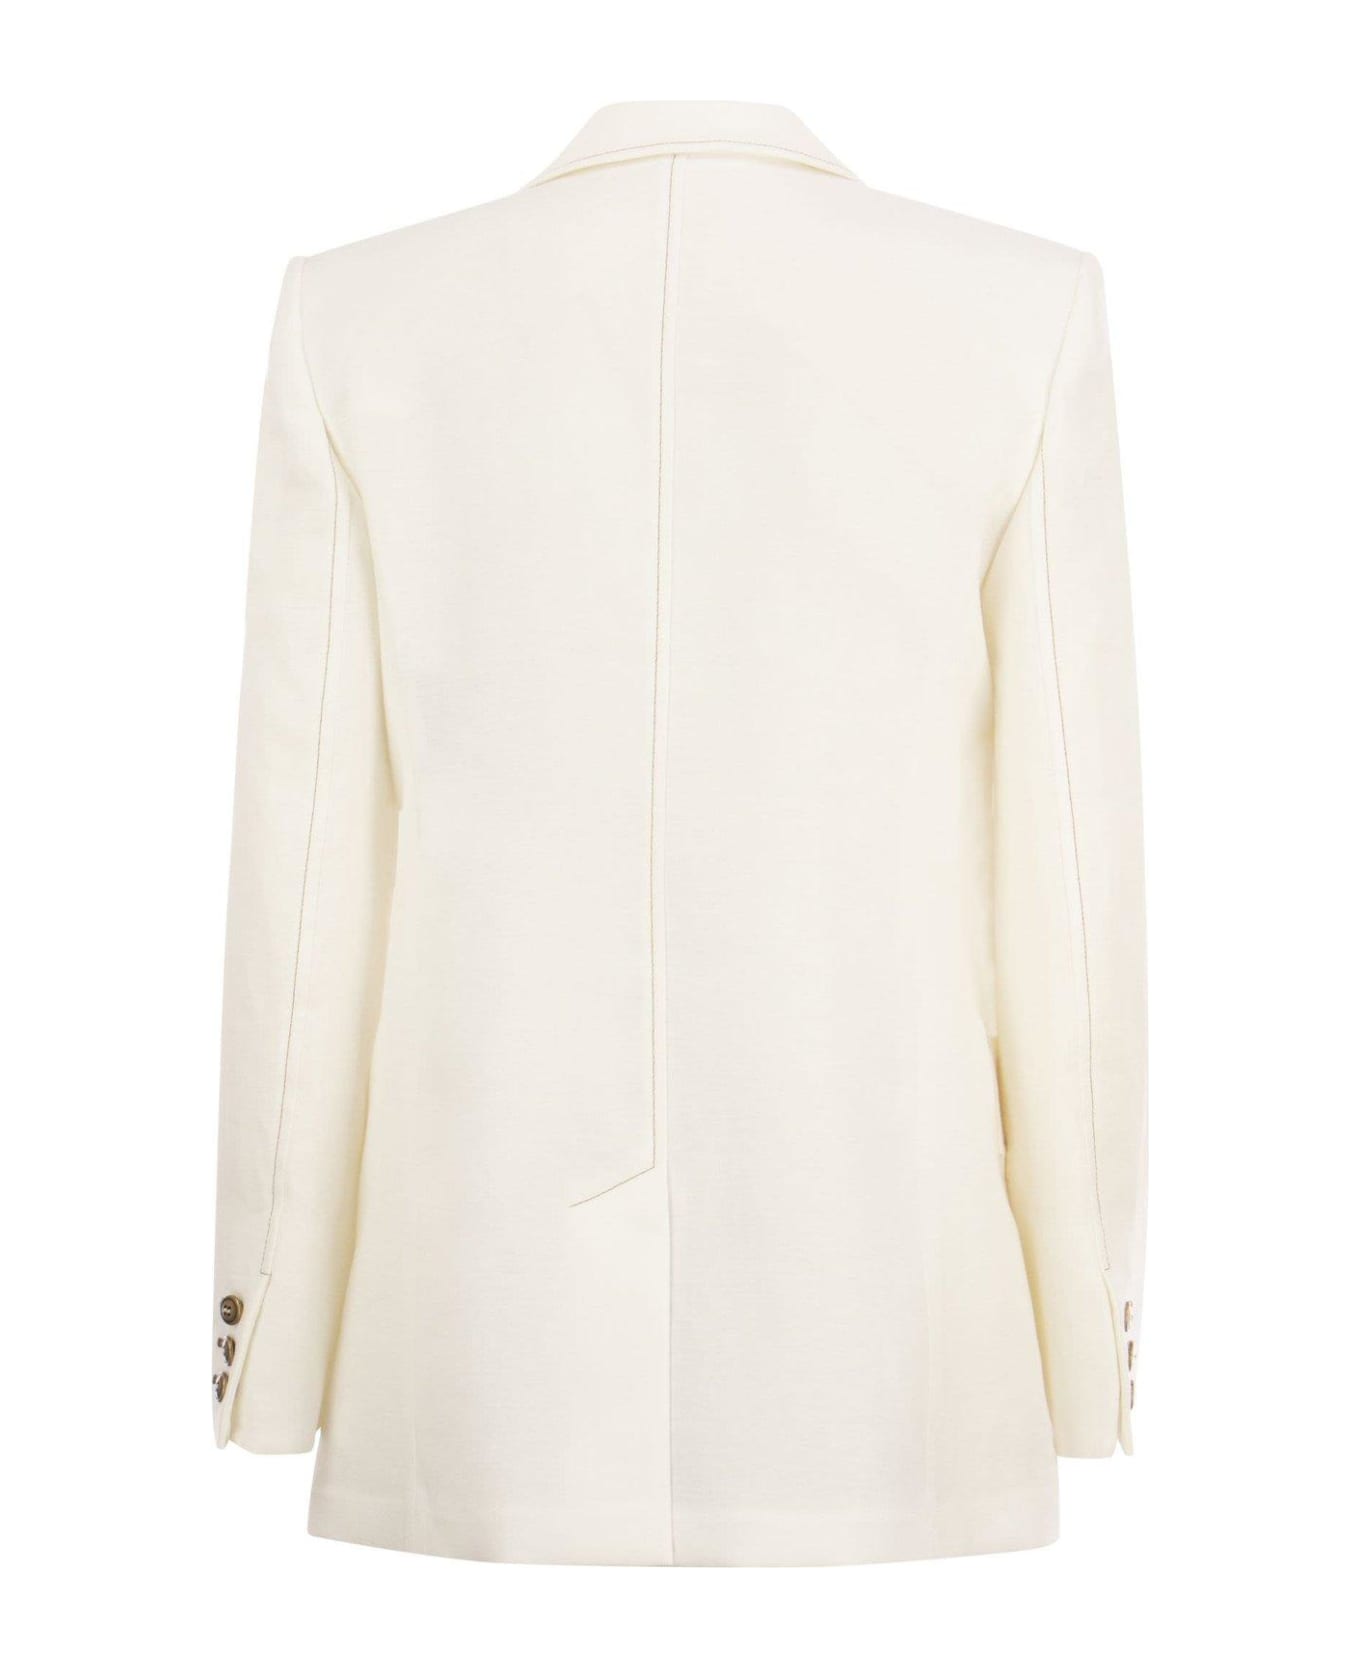 Max Mara Double Breasted Tailored Jacket - BIANCO